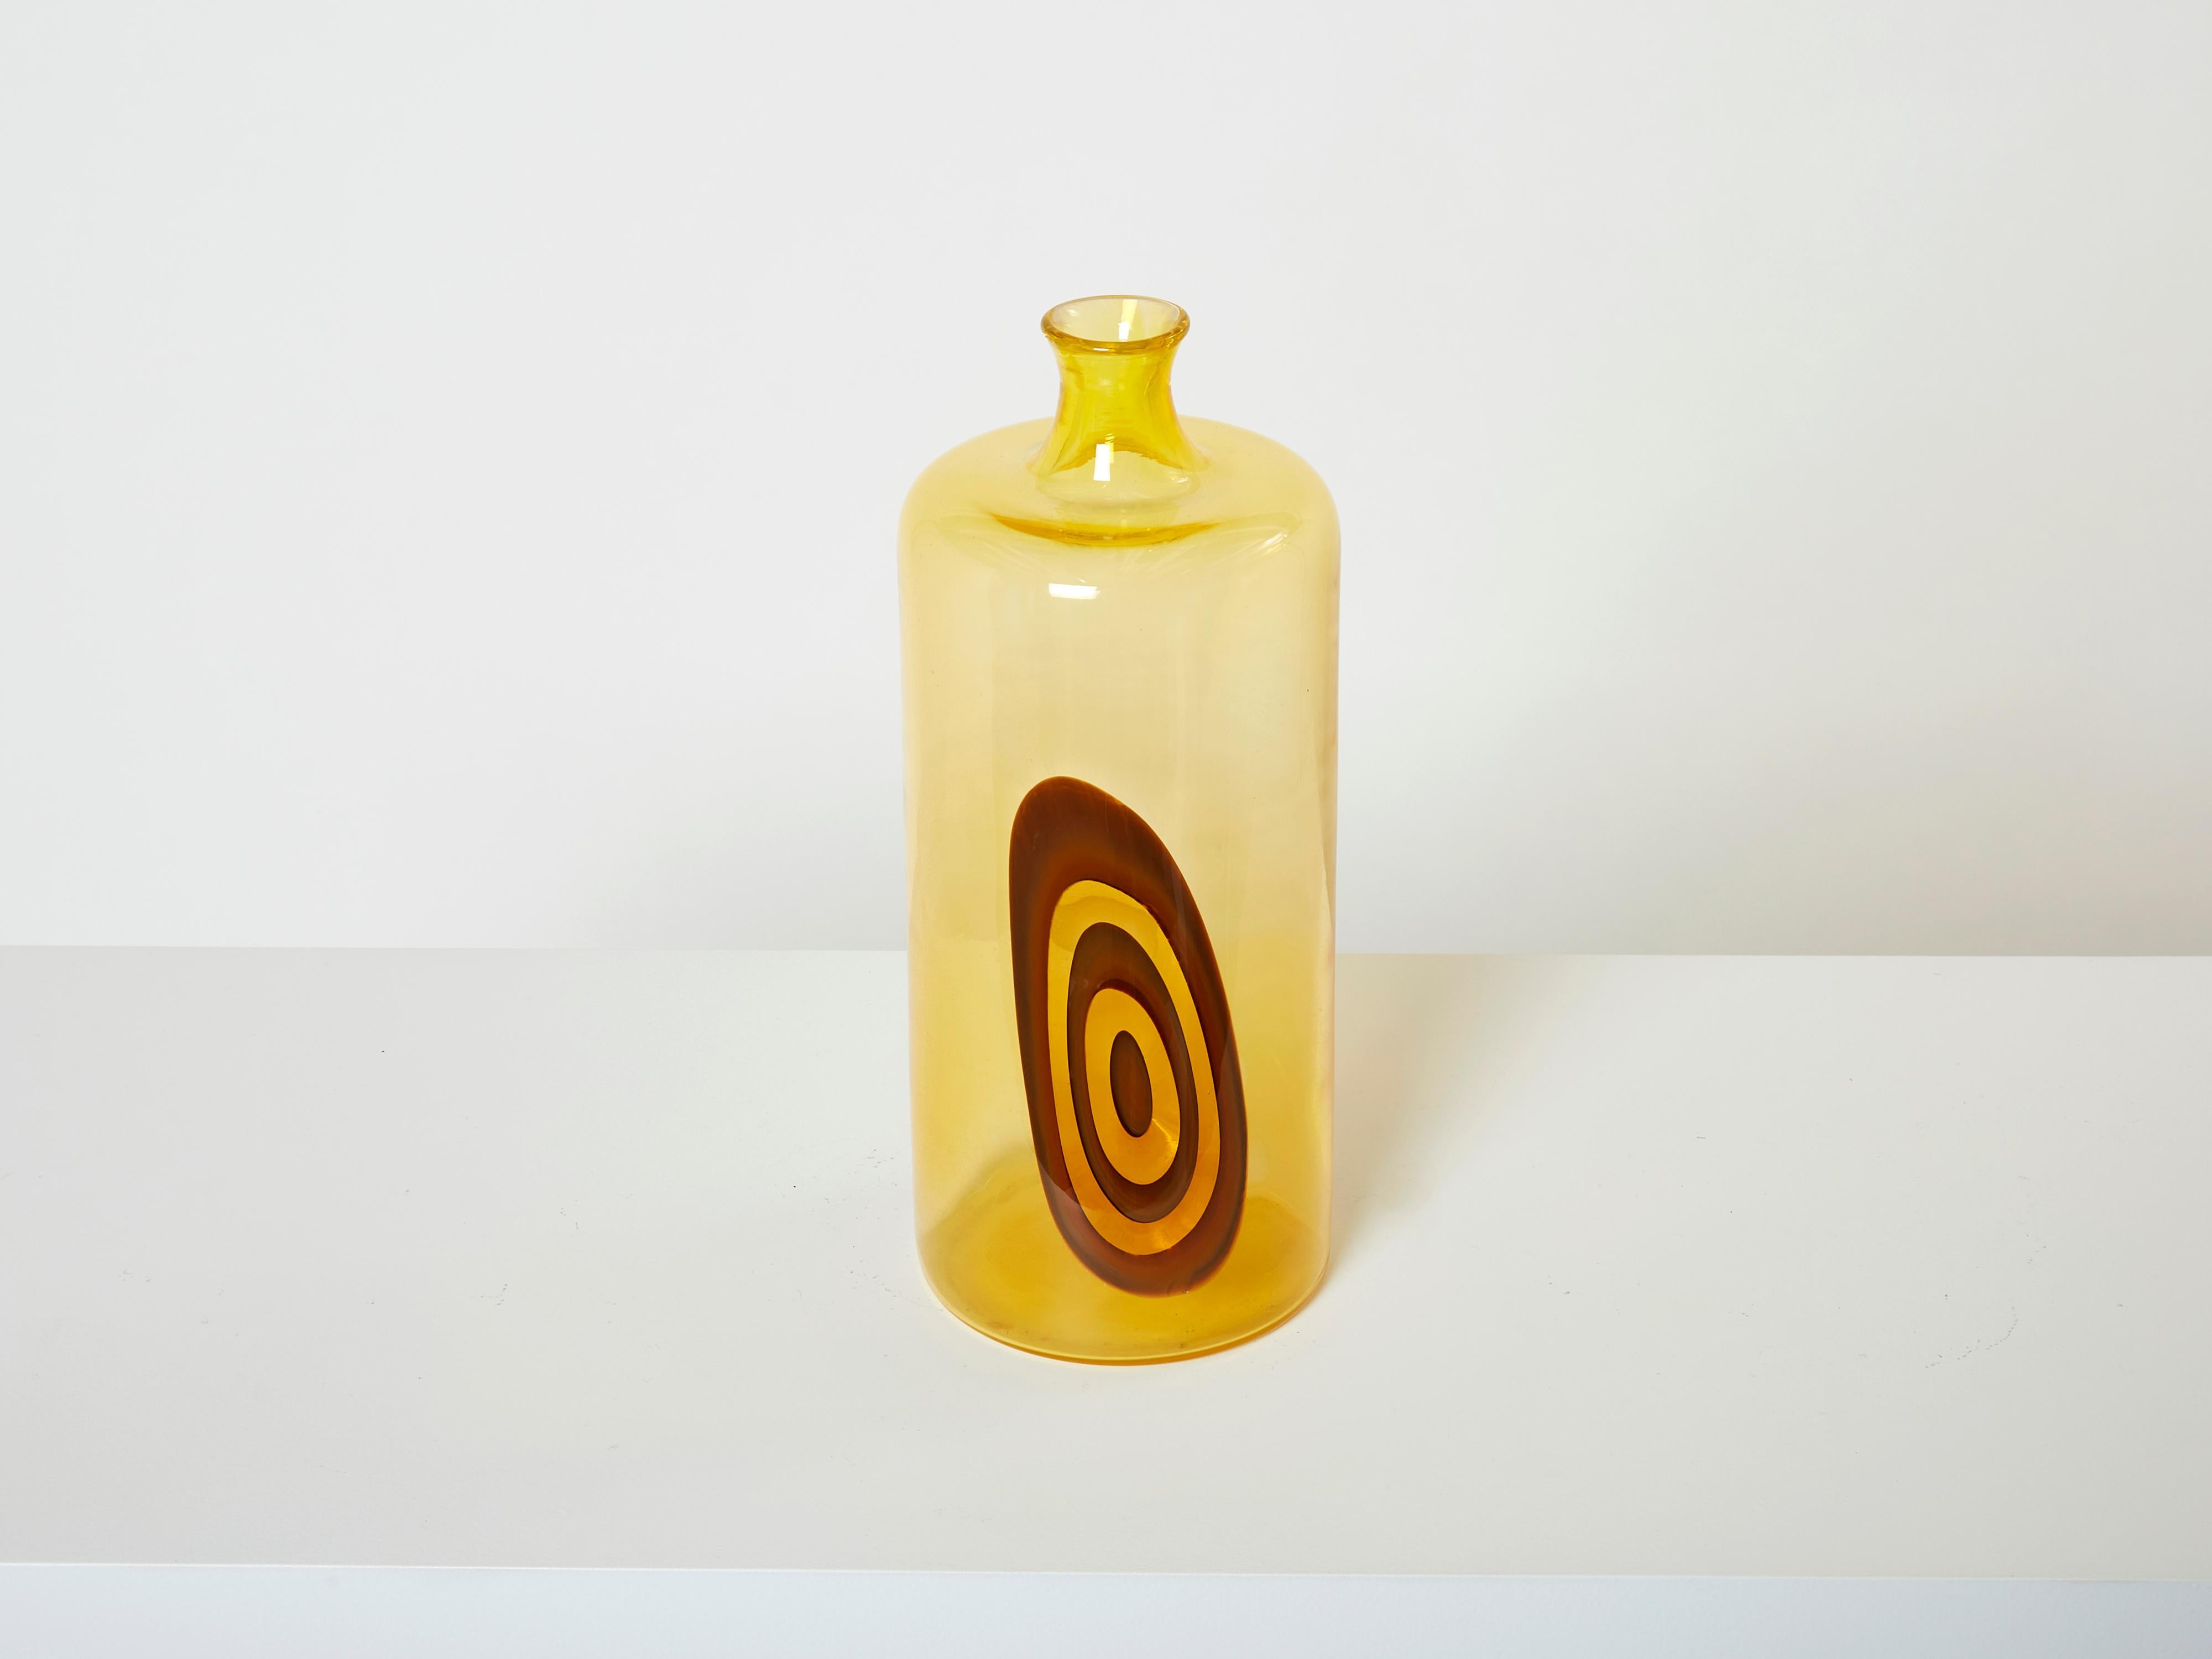 Rare Gianmaria Potenza vase for La Murrina made in 1968 from the Saturno series. This vase has eye-catching colors, with concentric orange circles on an amber background, submerged yellow Murano glass. It is very large and tall, bottle shaped with a